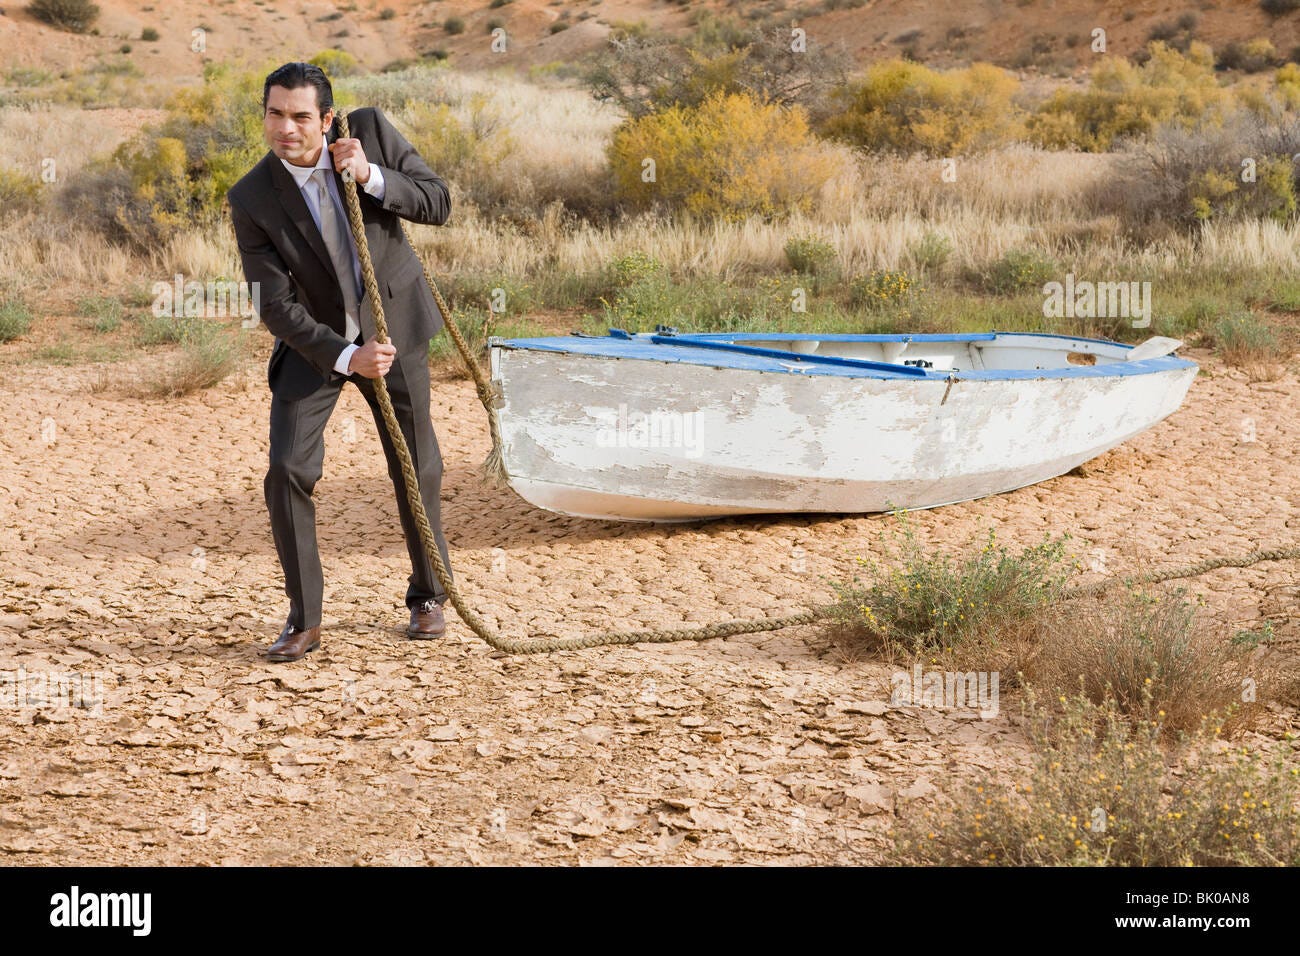 Businessman towing a boat in the desert Stock Photo - Alamy